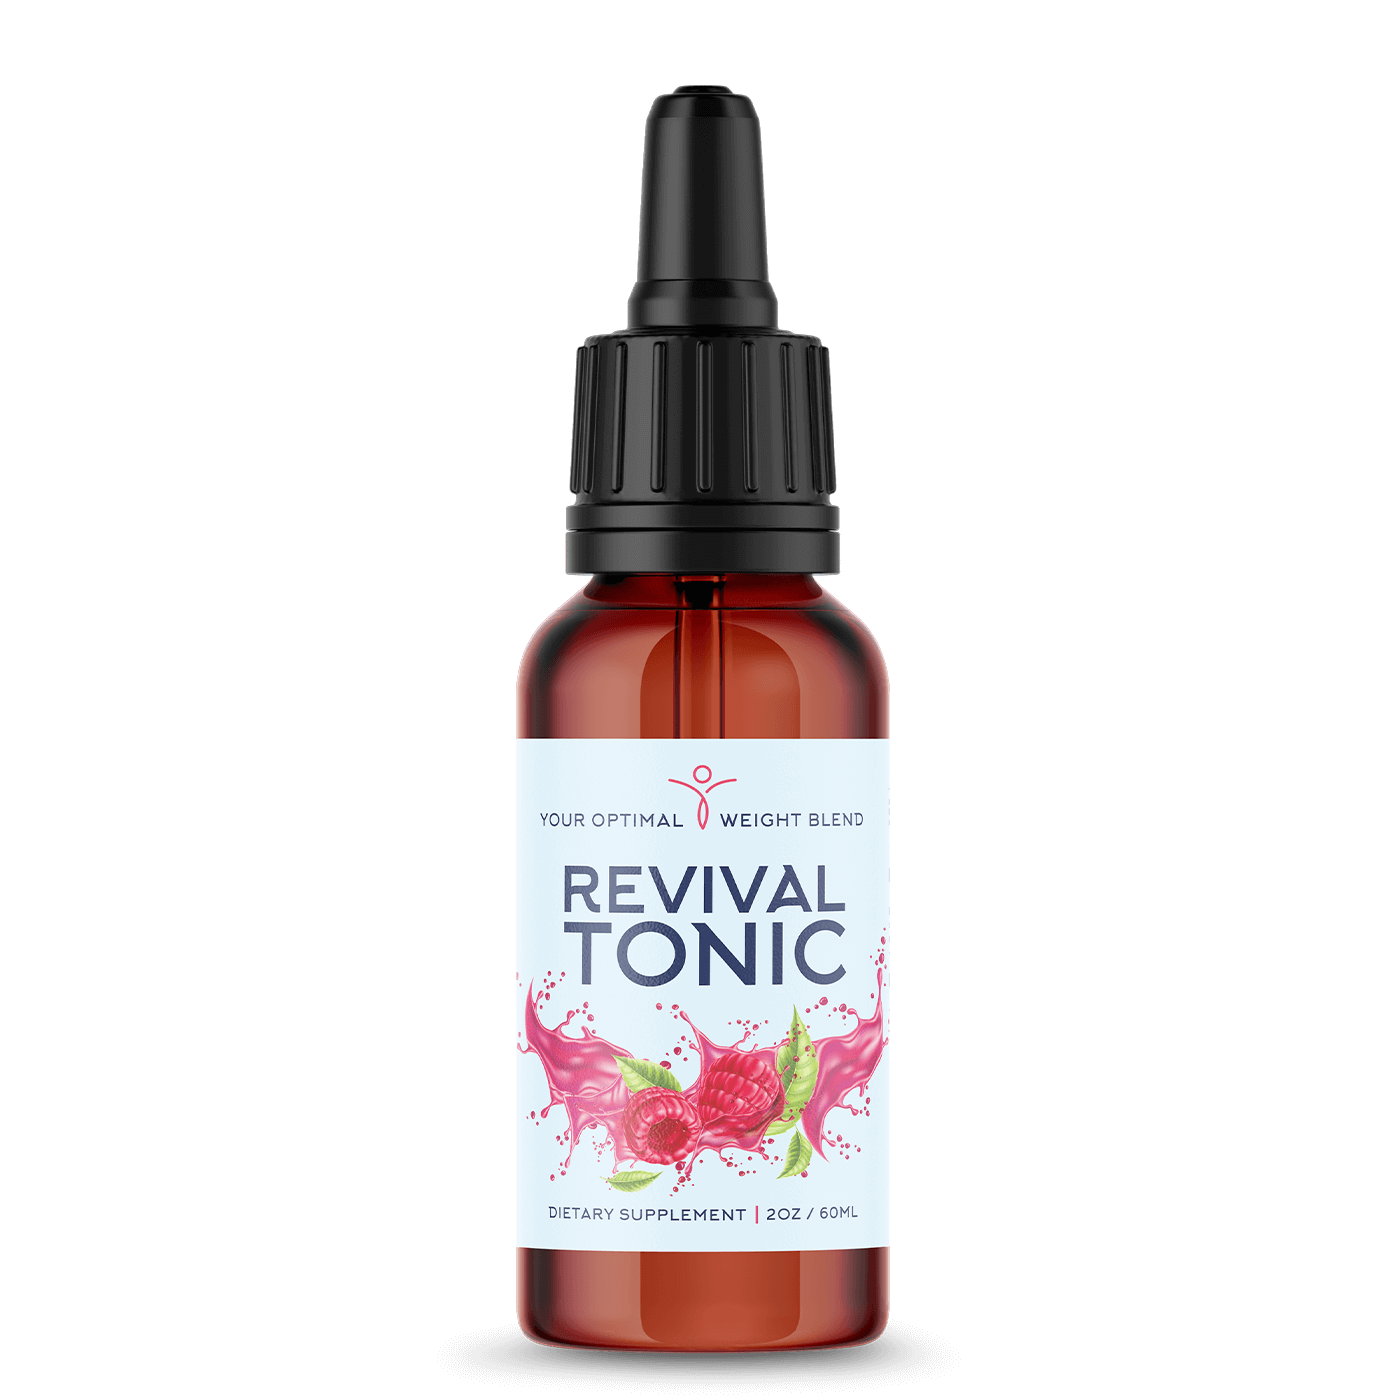 Maintain A Healthy Weight: Revival Tonic